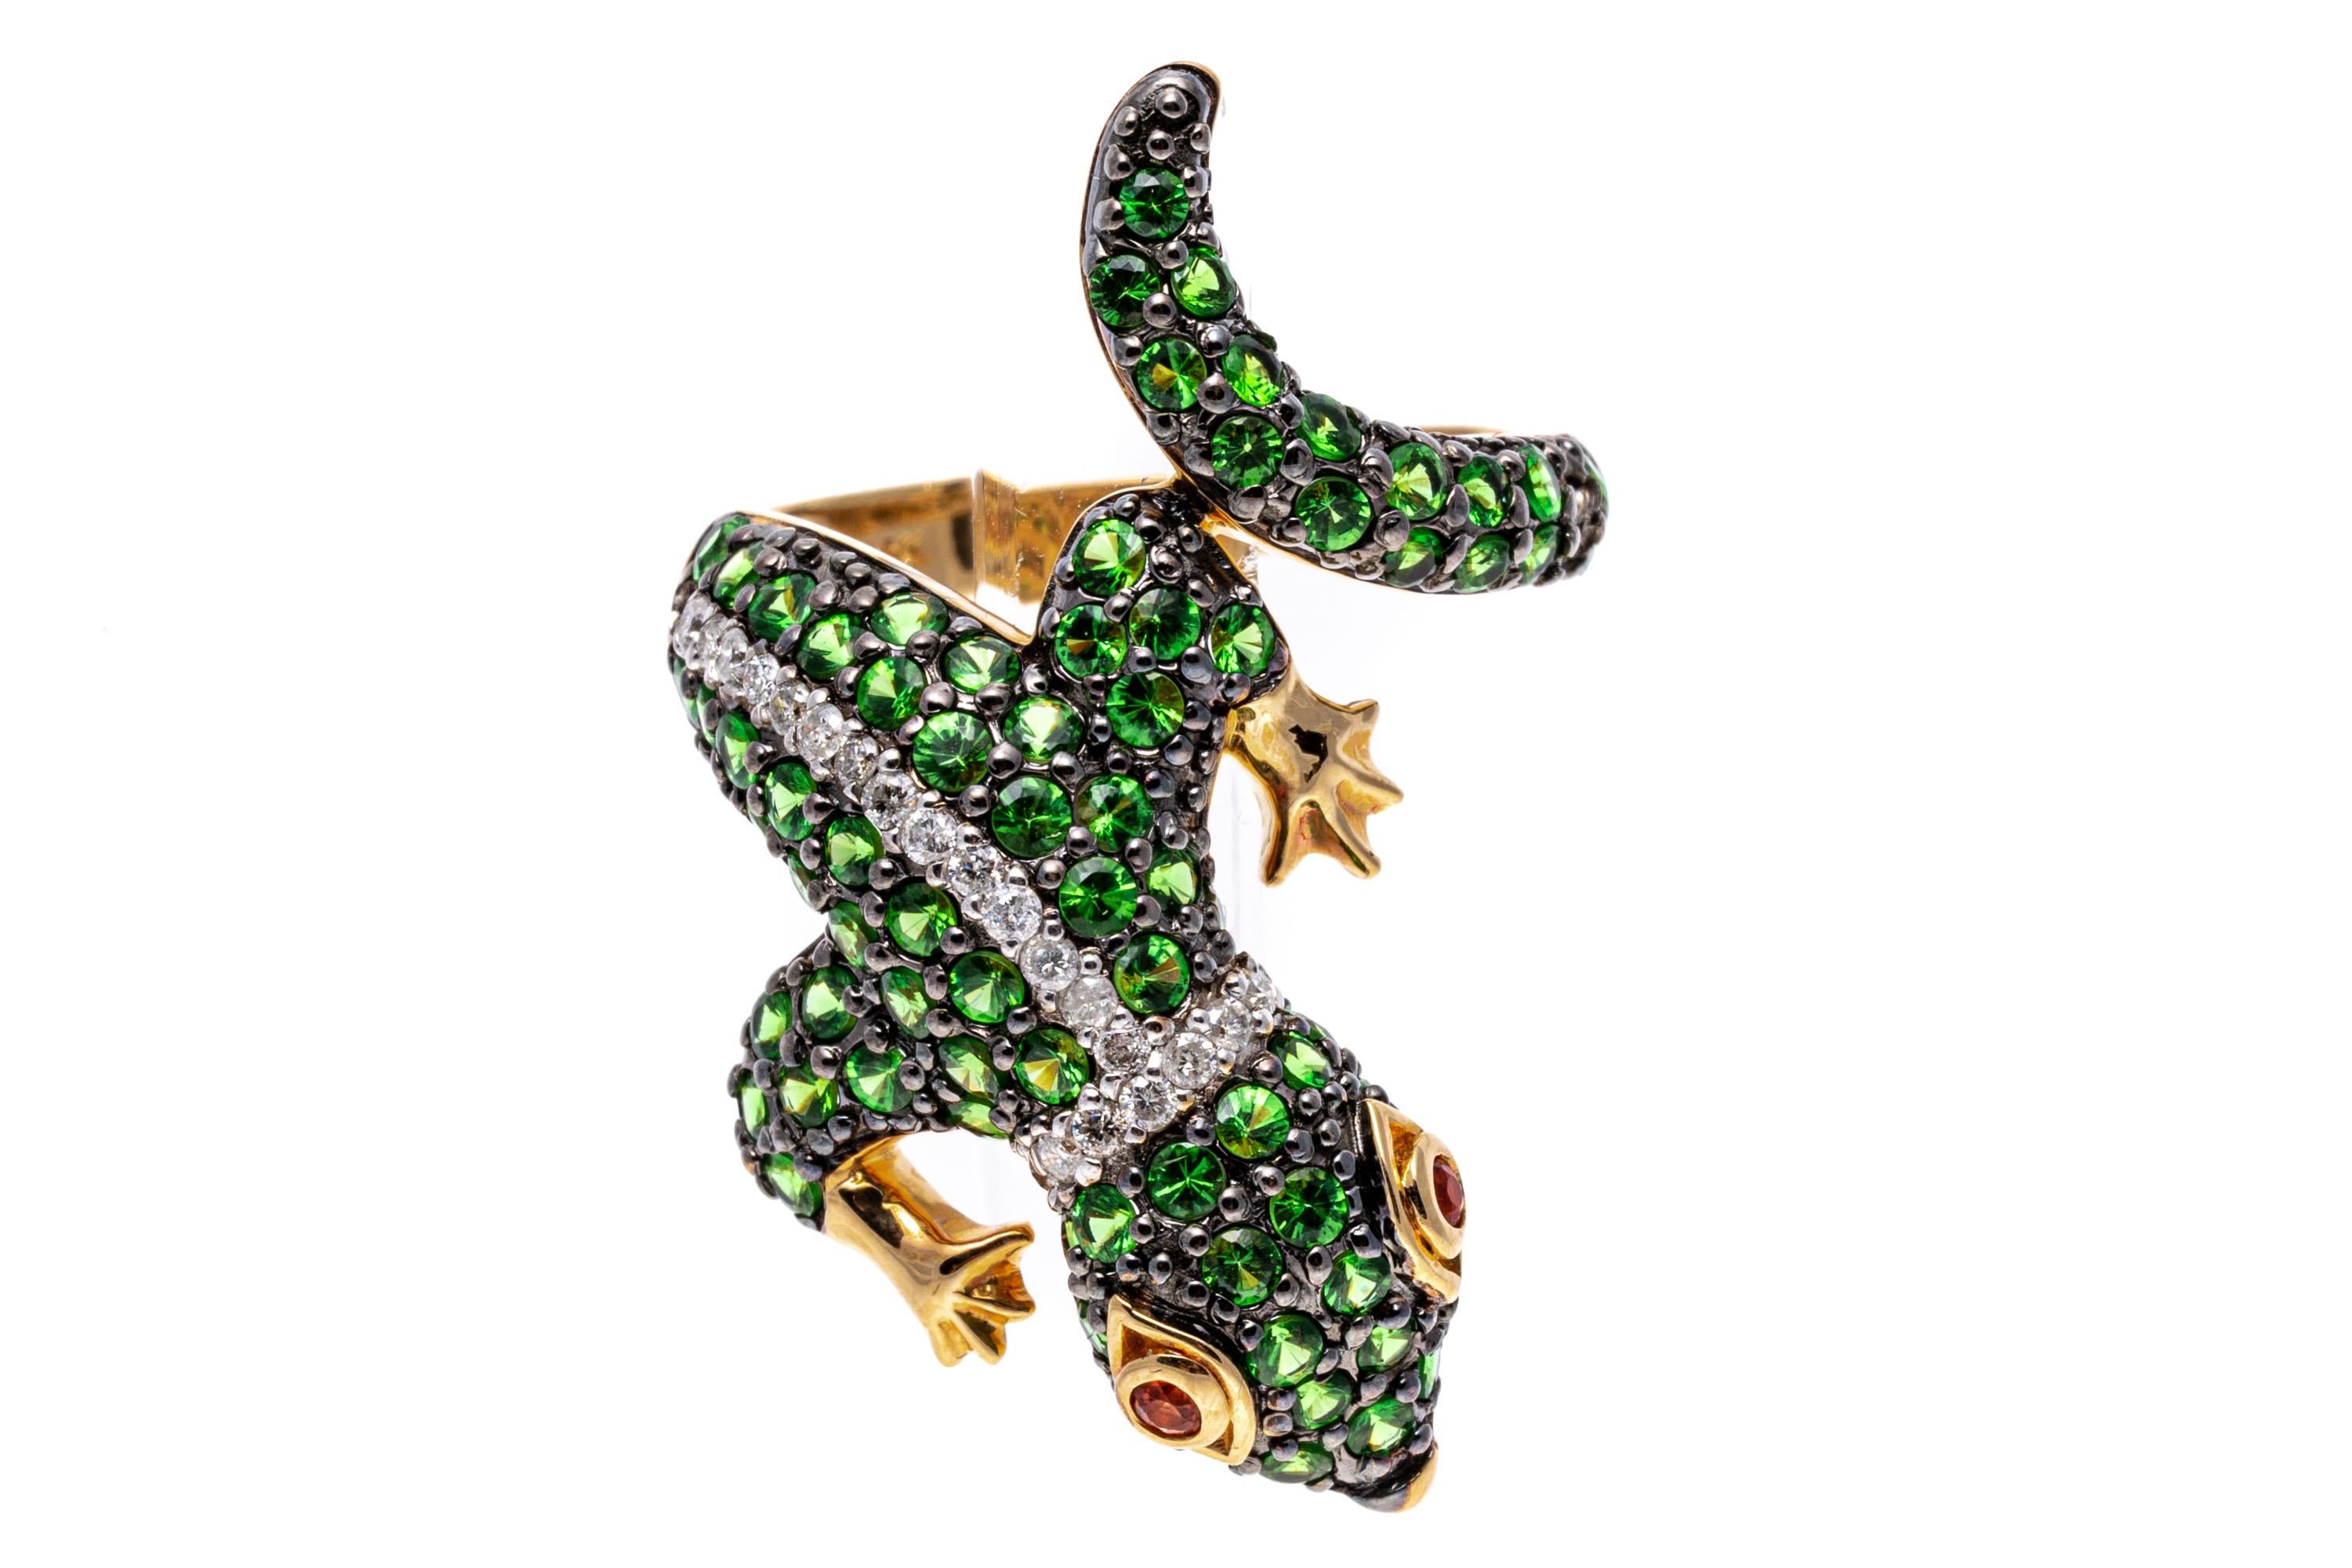 14k Yellow Gold Pave Tsavorite And Diamond Bypass Lizard Ring, Size 7.25 For Sale 2